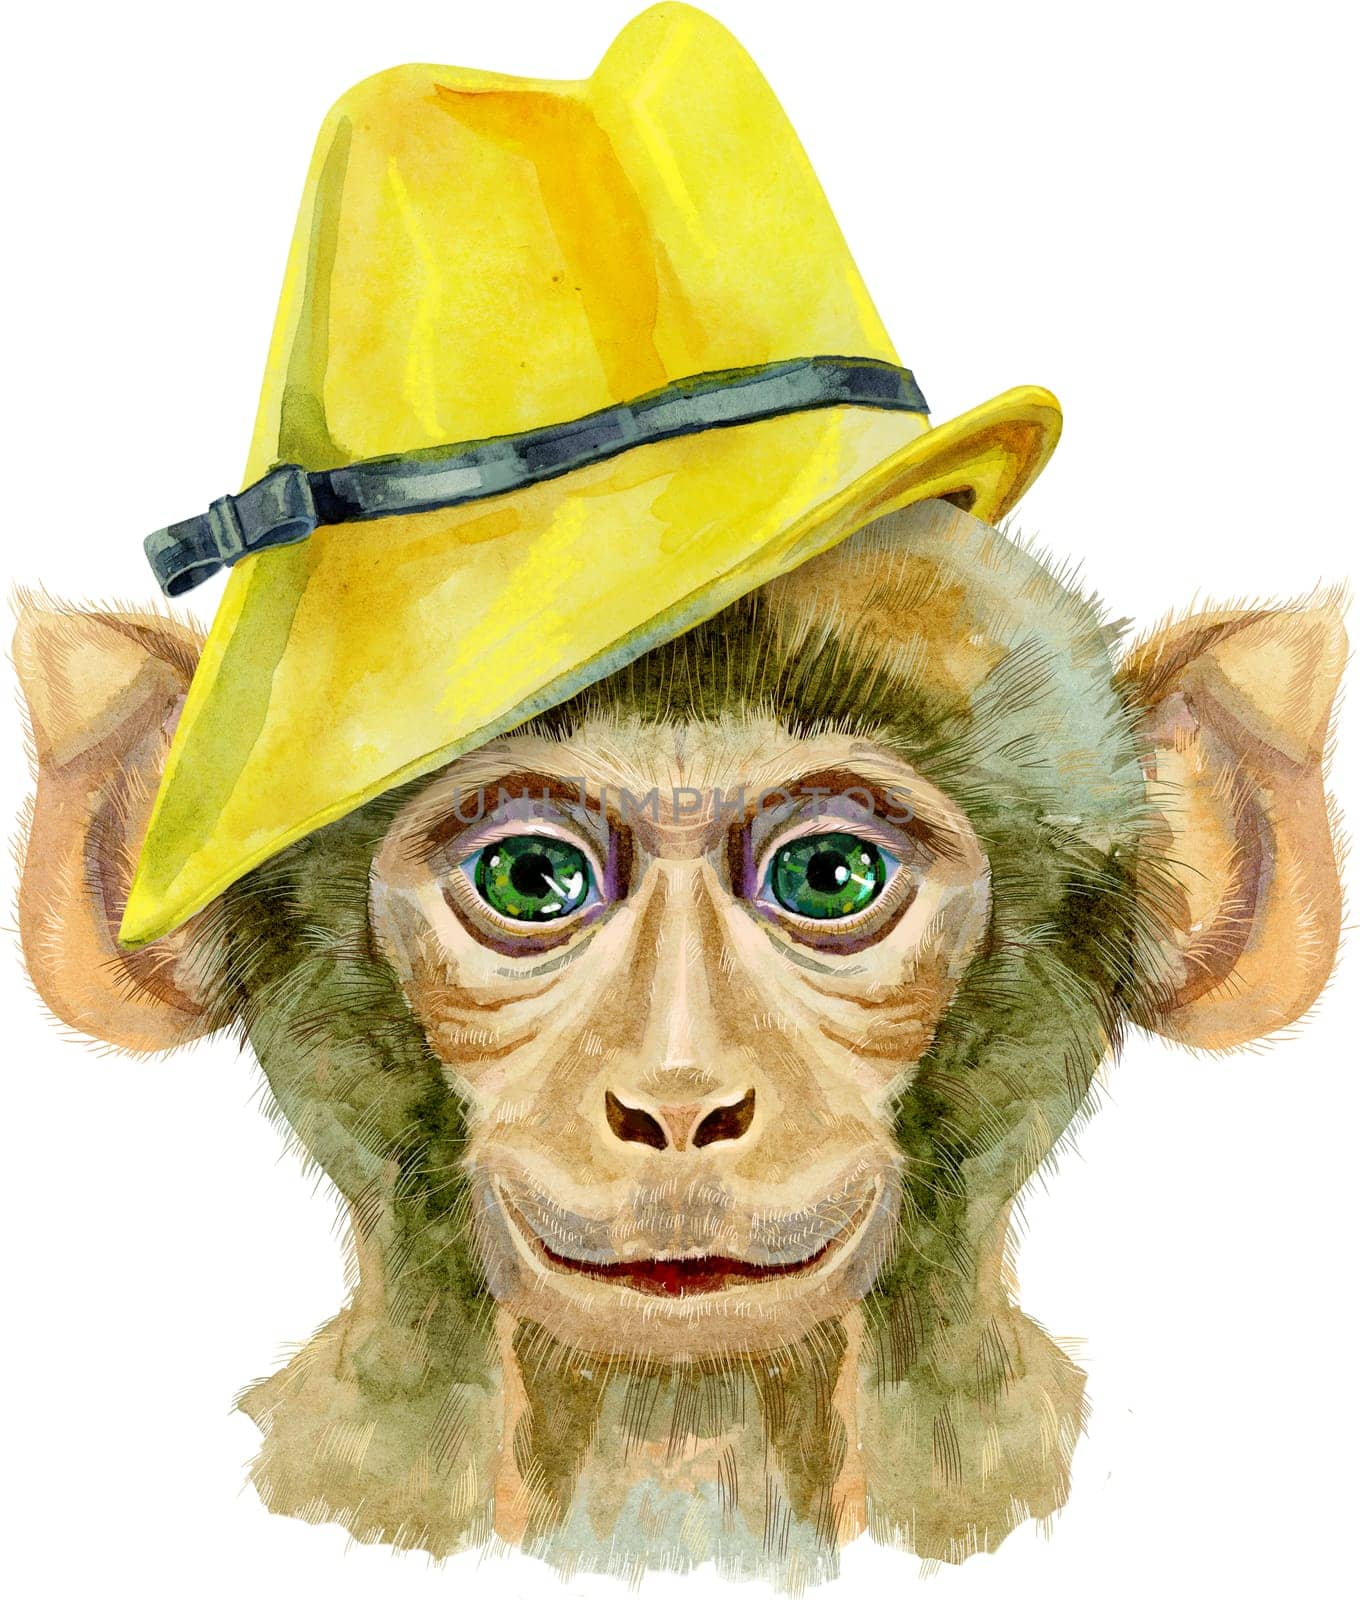 Monkey in yellow hat. Watercolor illustration isolated on white background. by NataOmsk